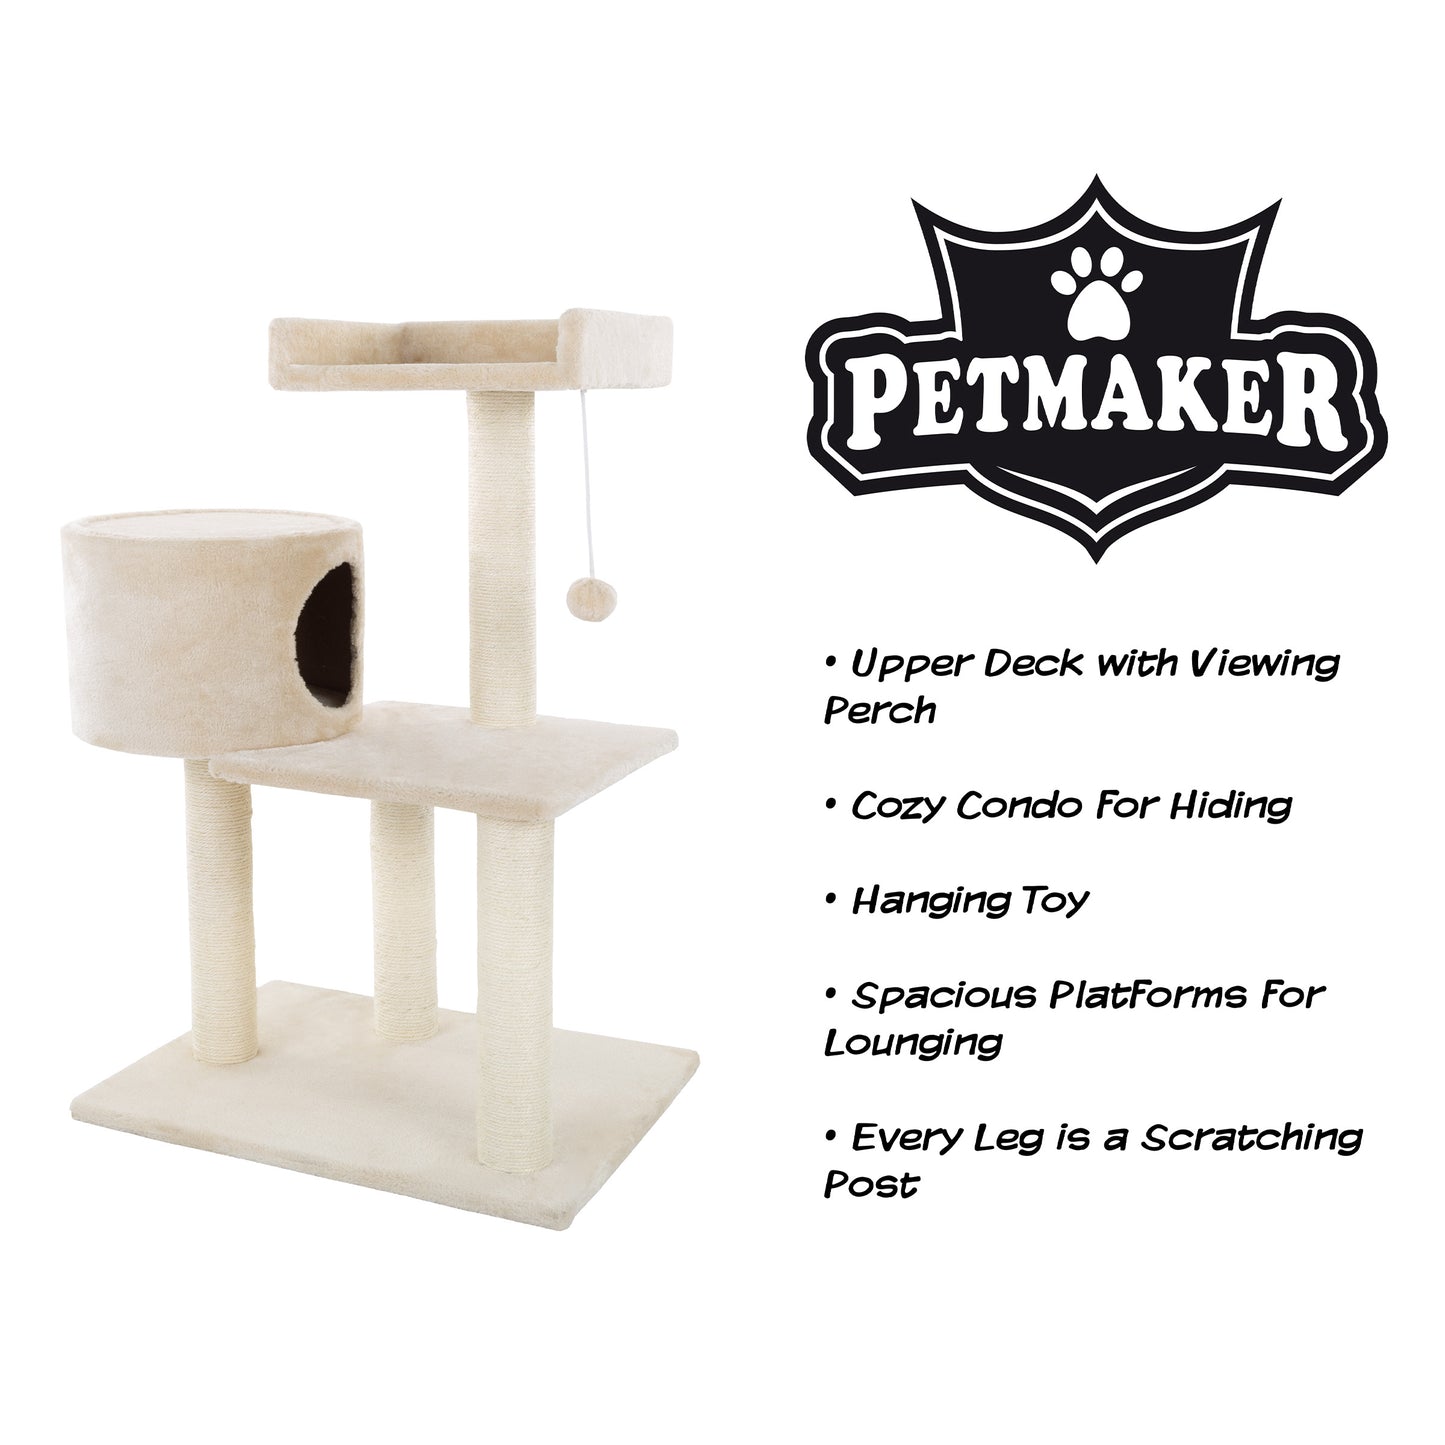 3-Tier Cat Tree With Condo And Scratching Posts